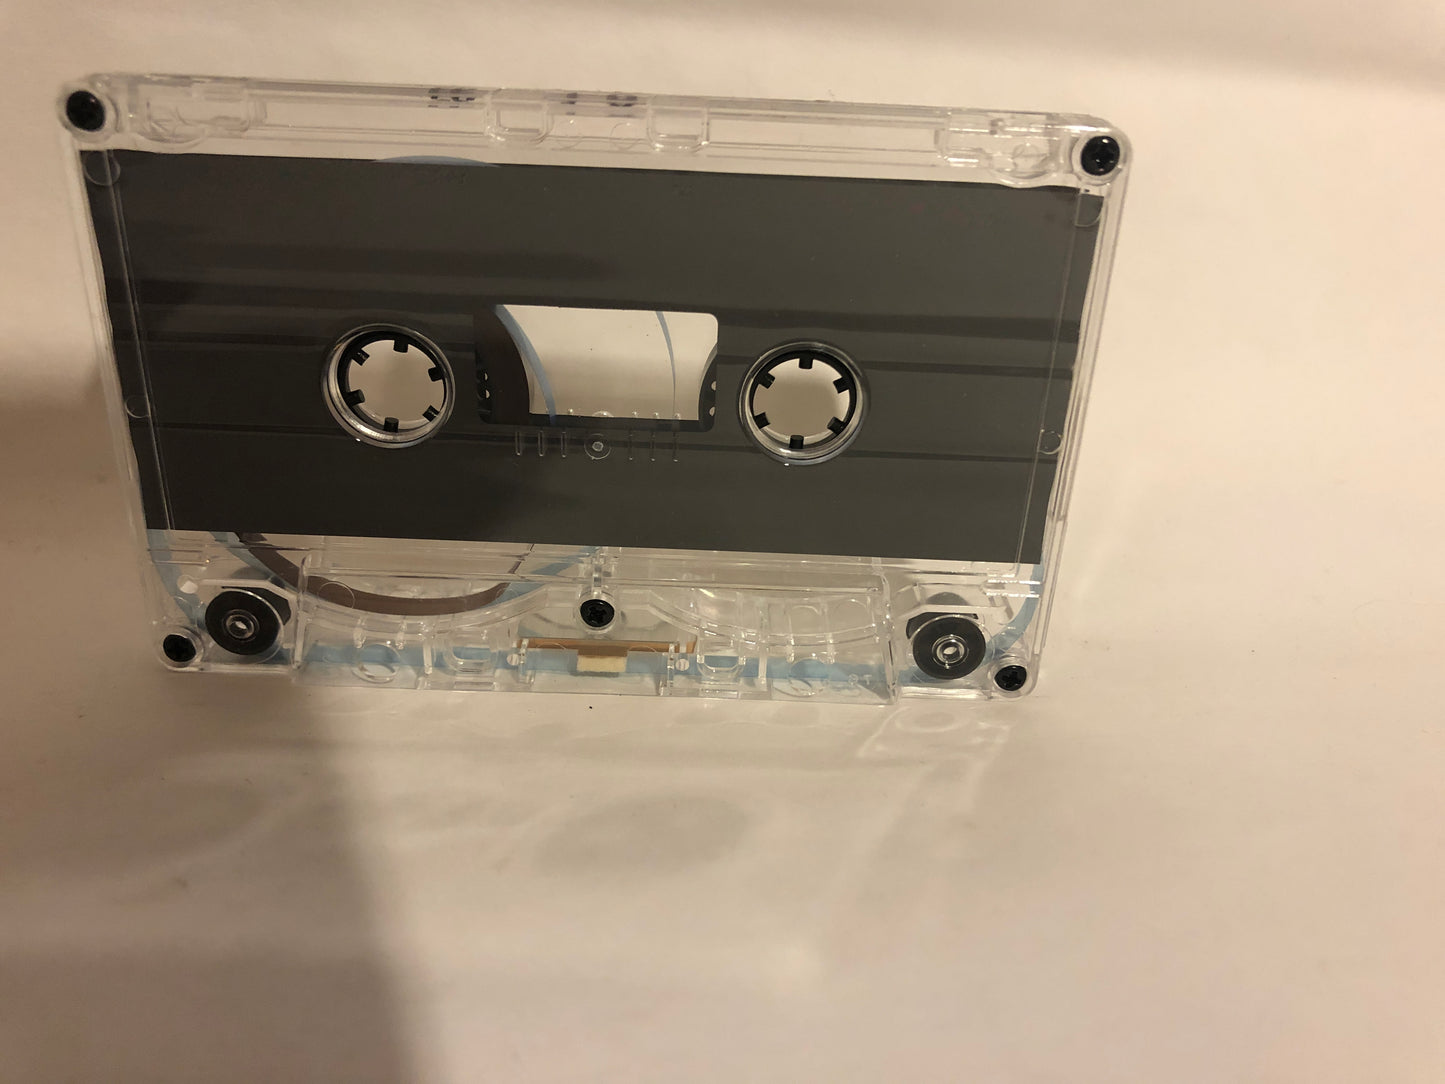 New Blank Air Check Cassette Tapes - 71 Available